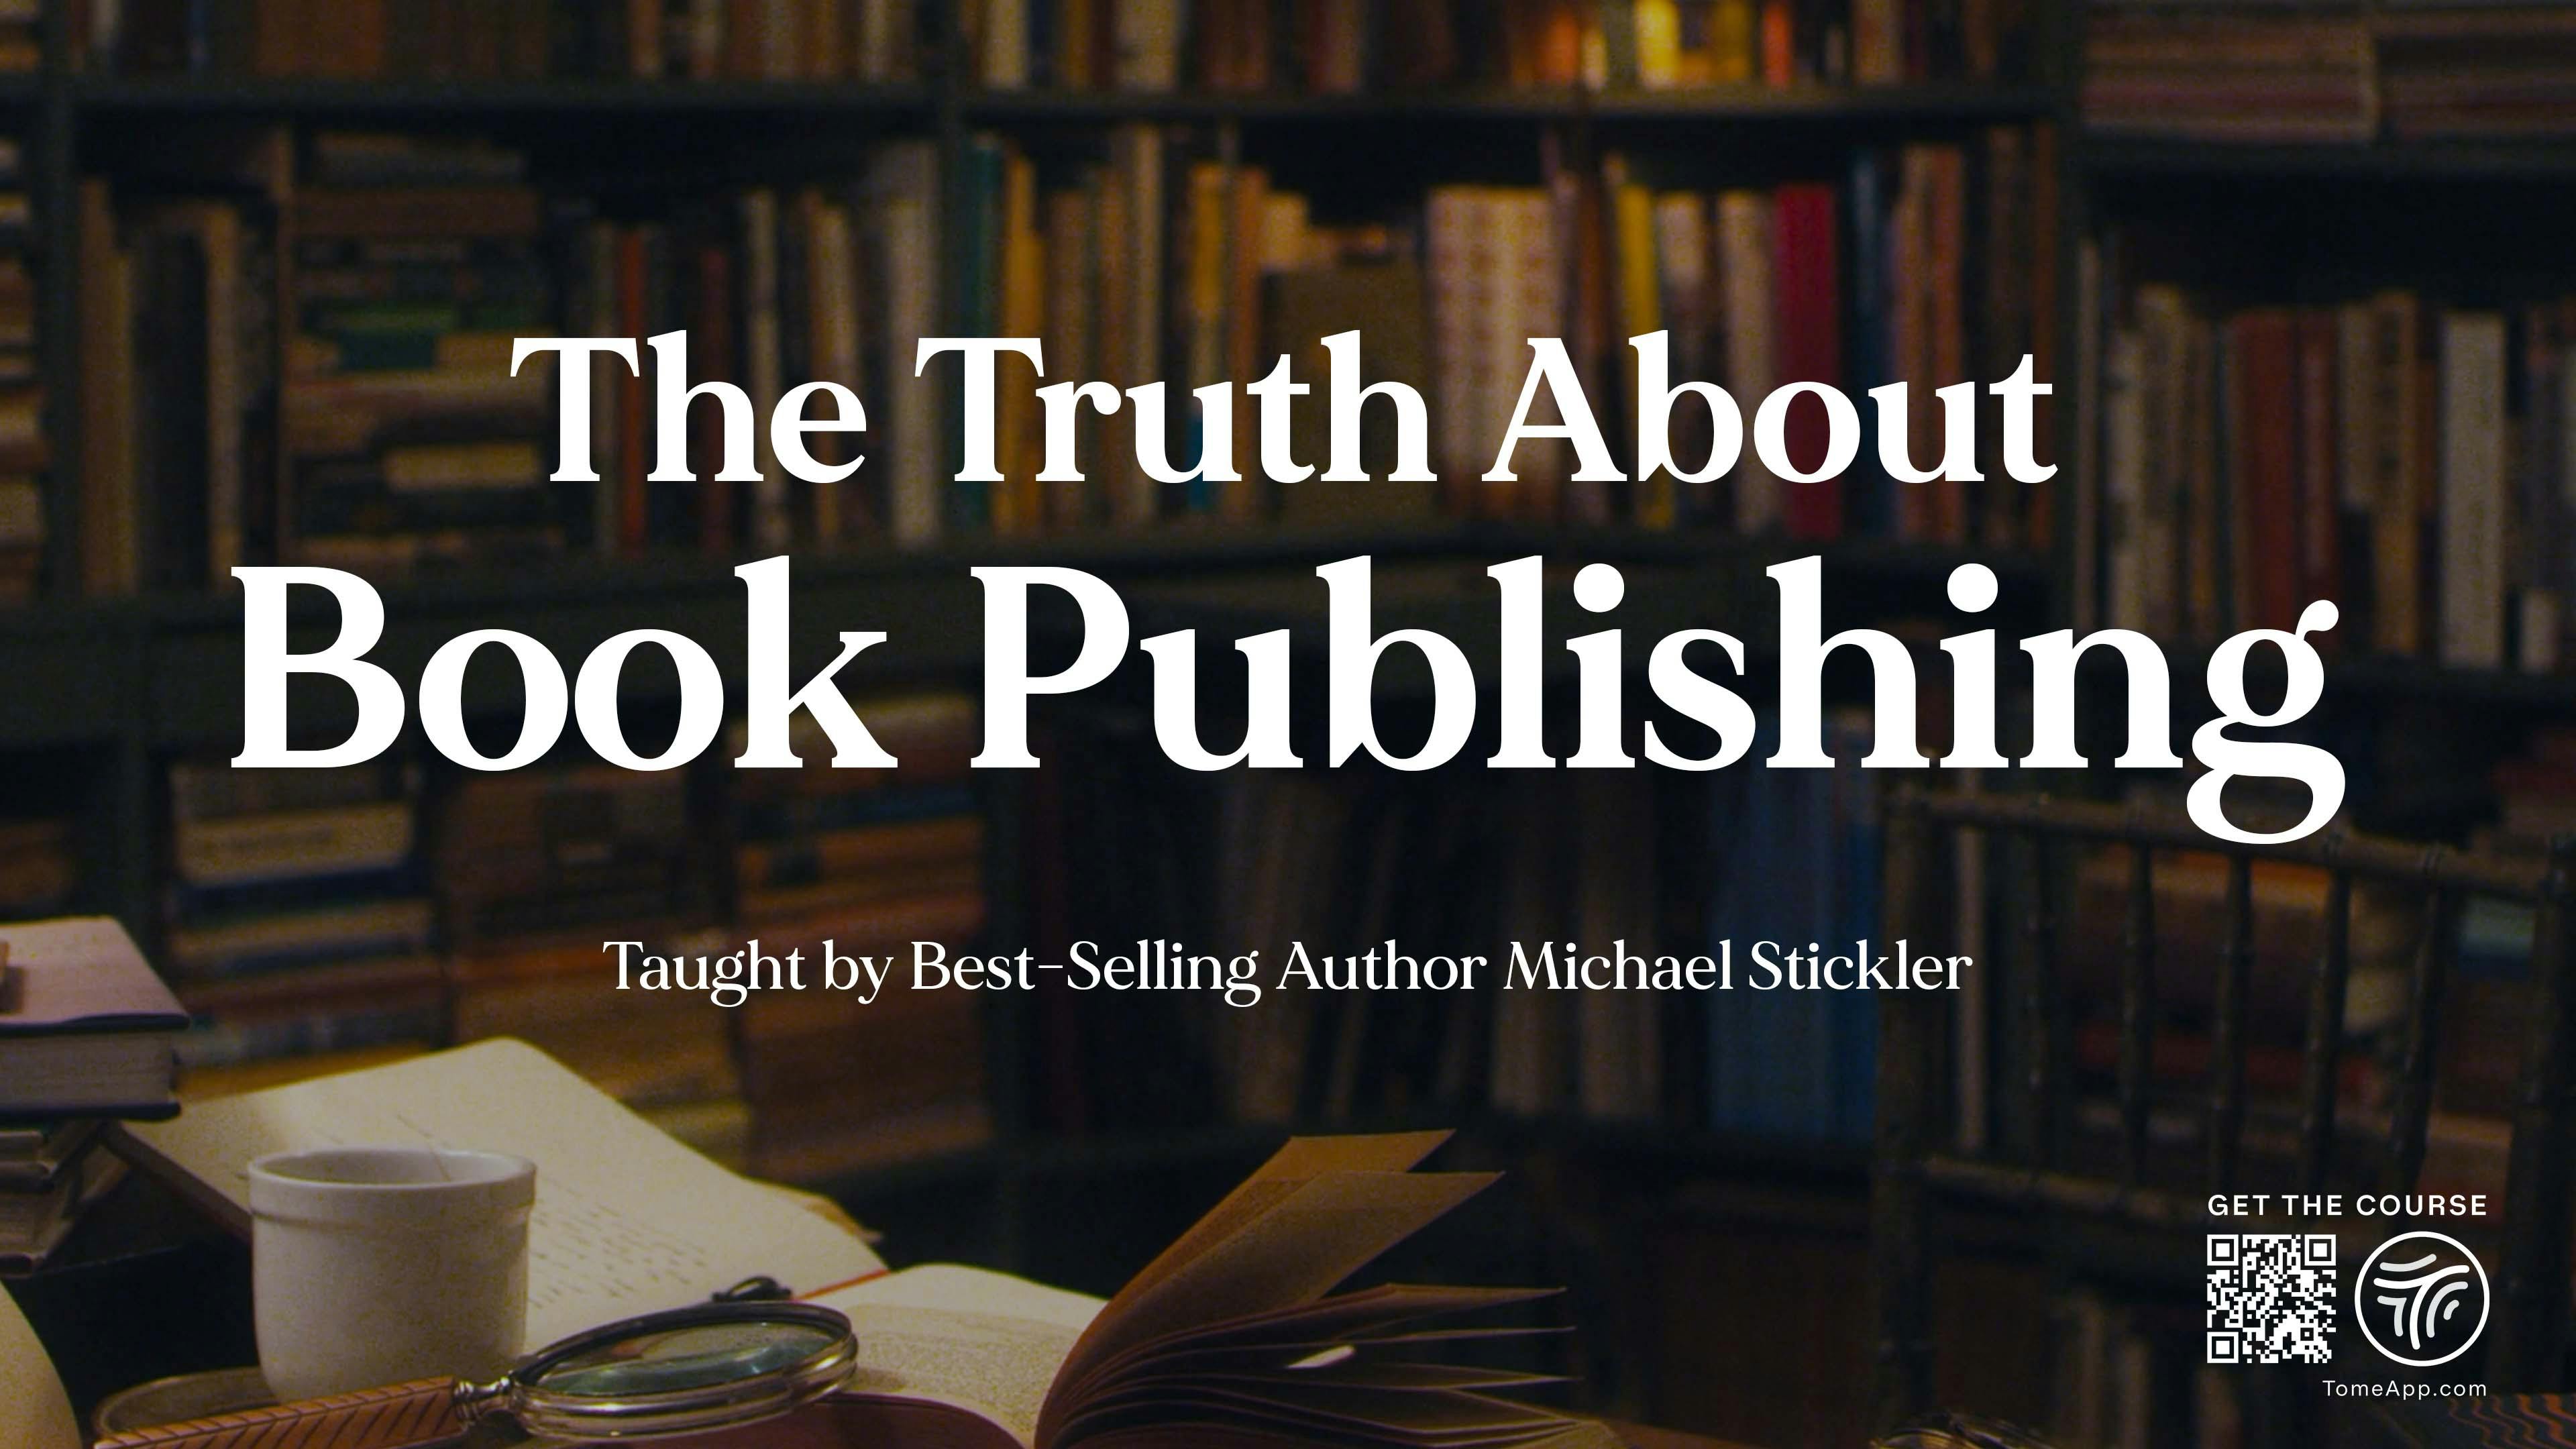 The Truth About Book Publishing